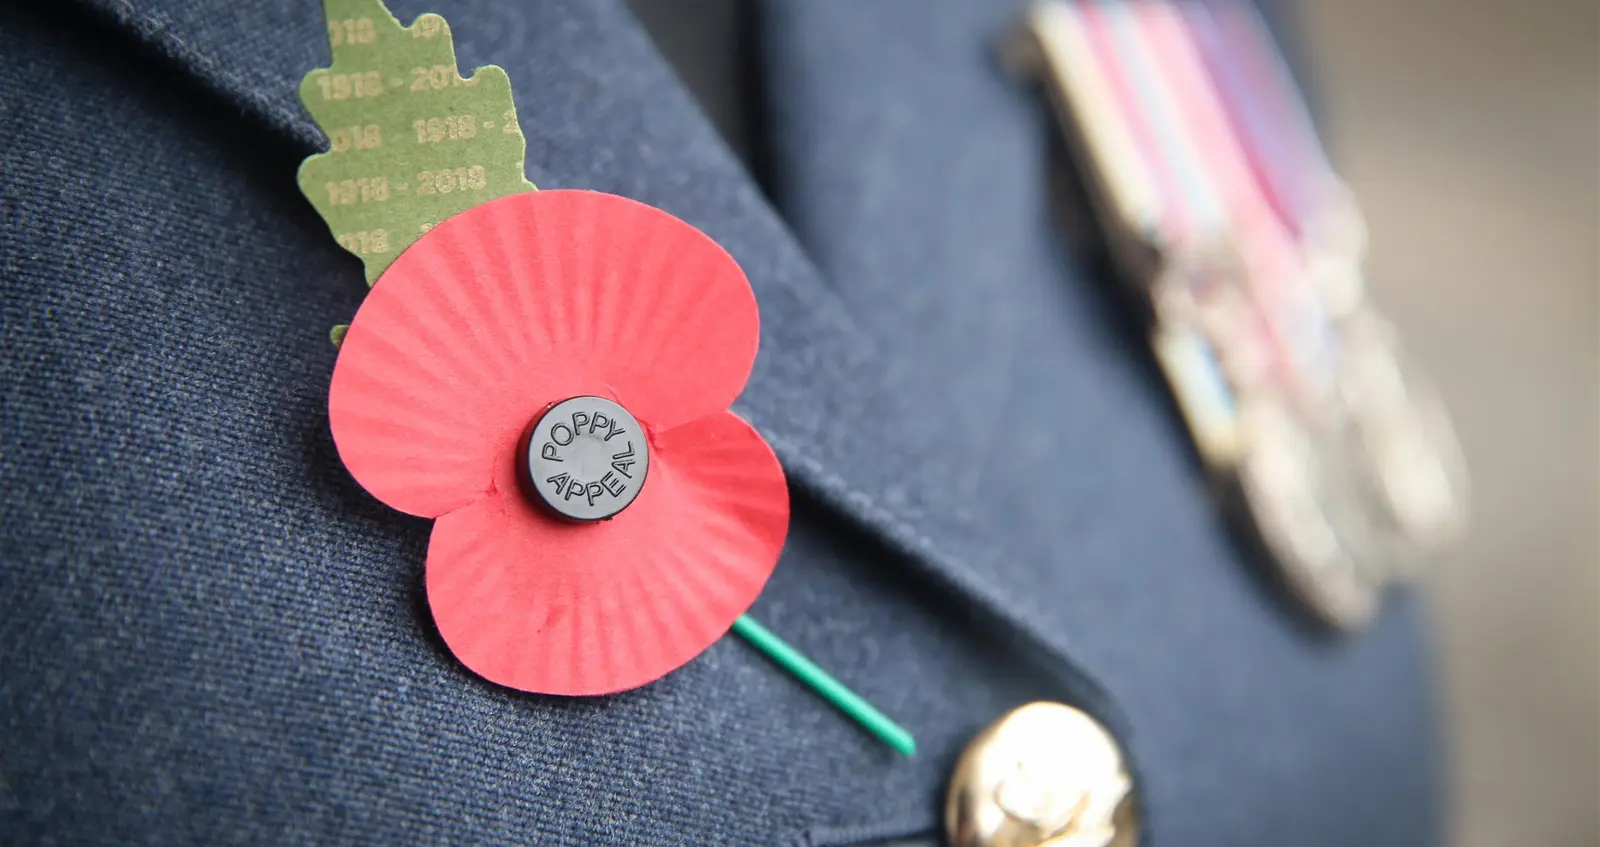 Service personnel wearing a poppy and medals.